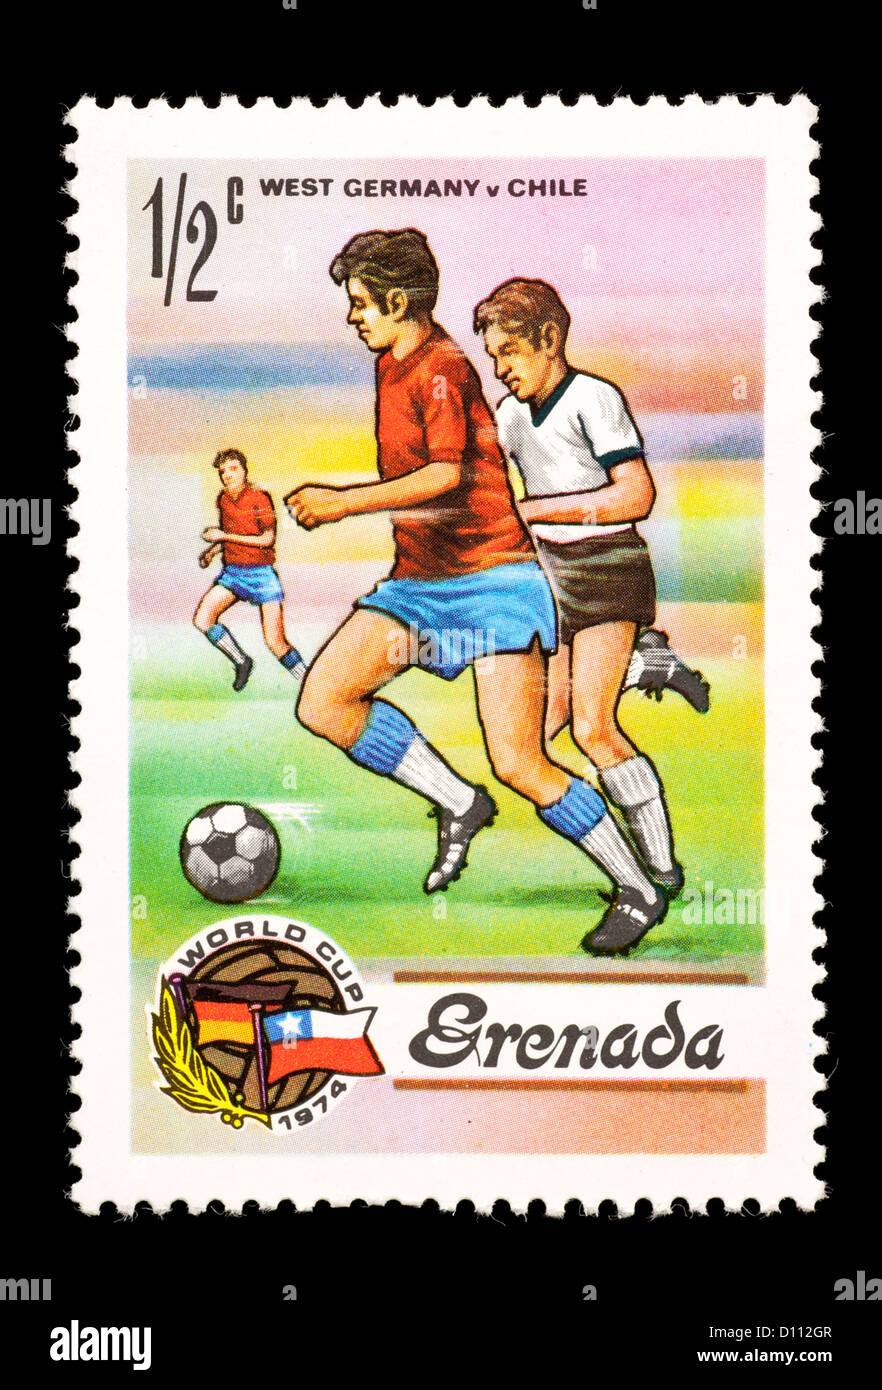 Postage stamp from Grenada depicting two soccer players, issued for the 1974 World Cup. Stock Photo